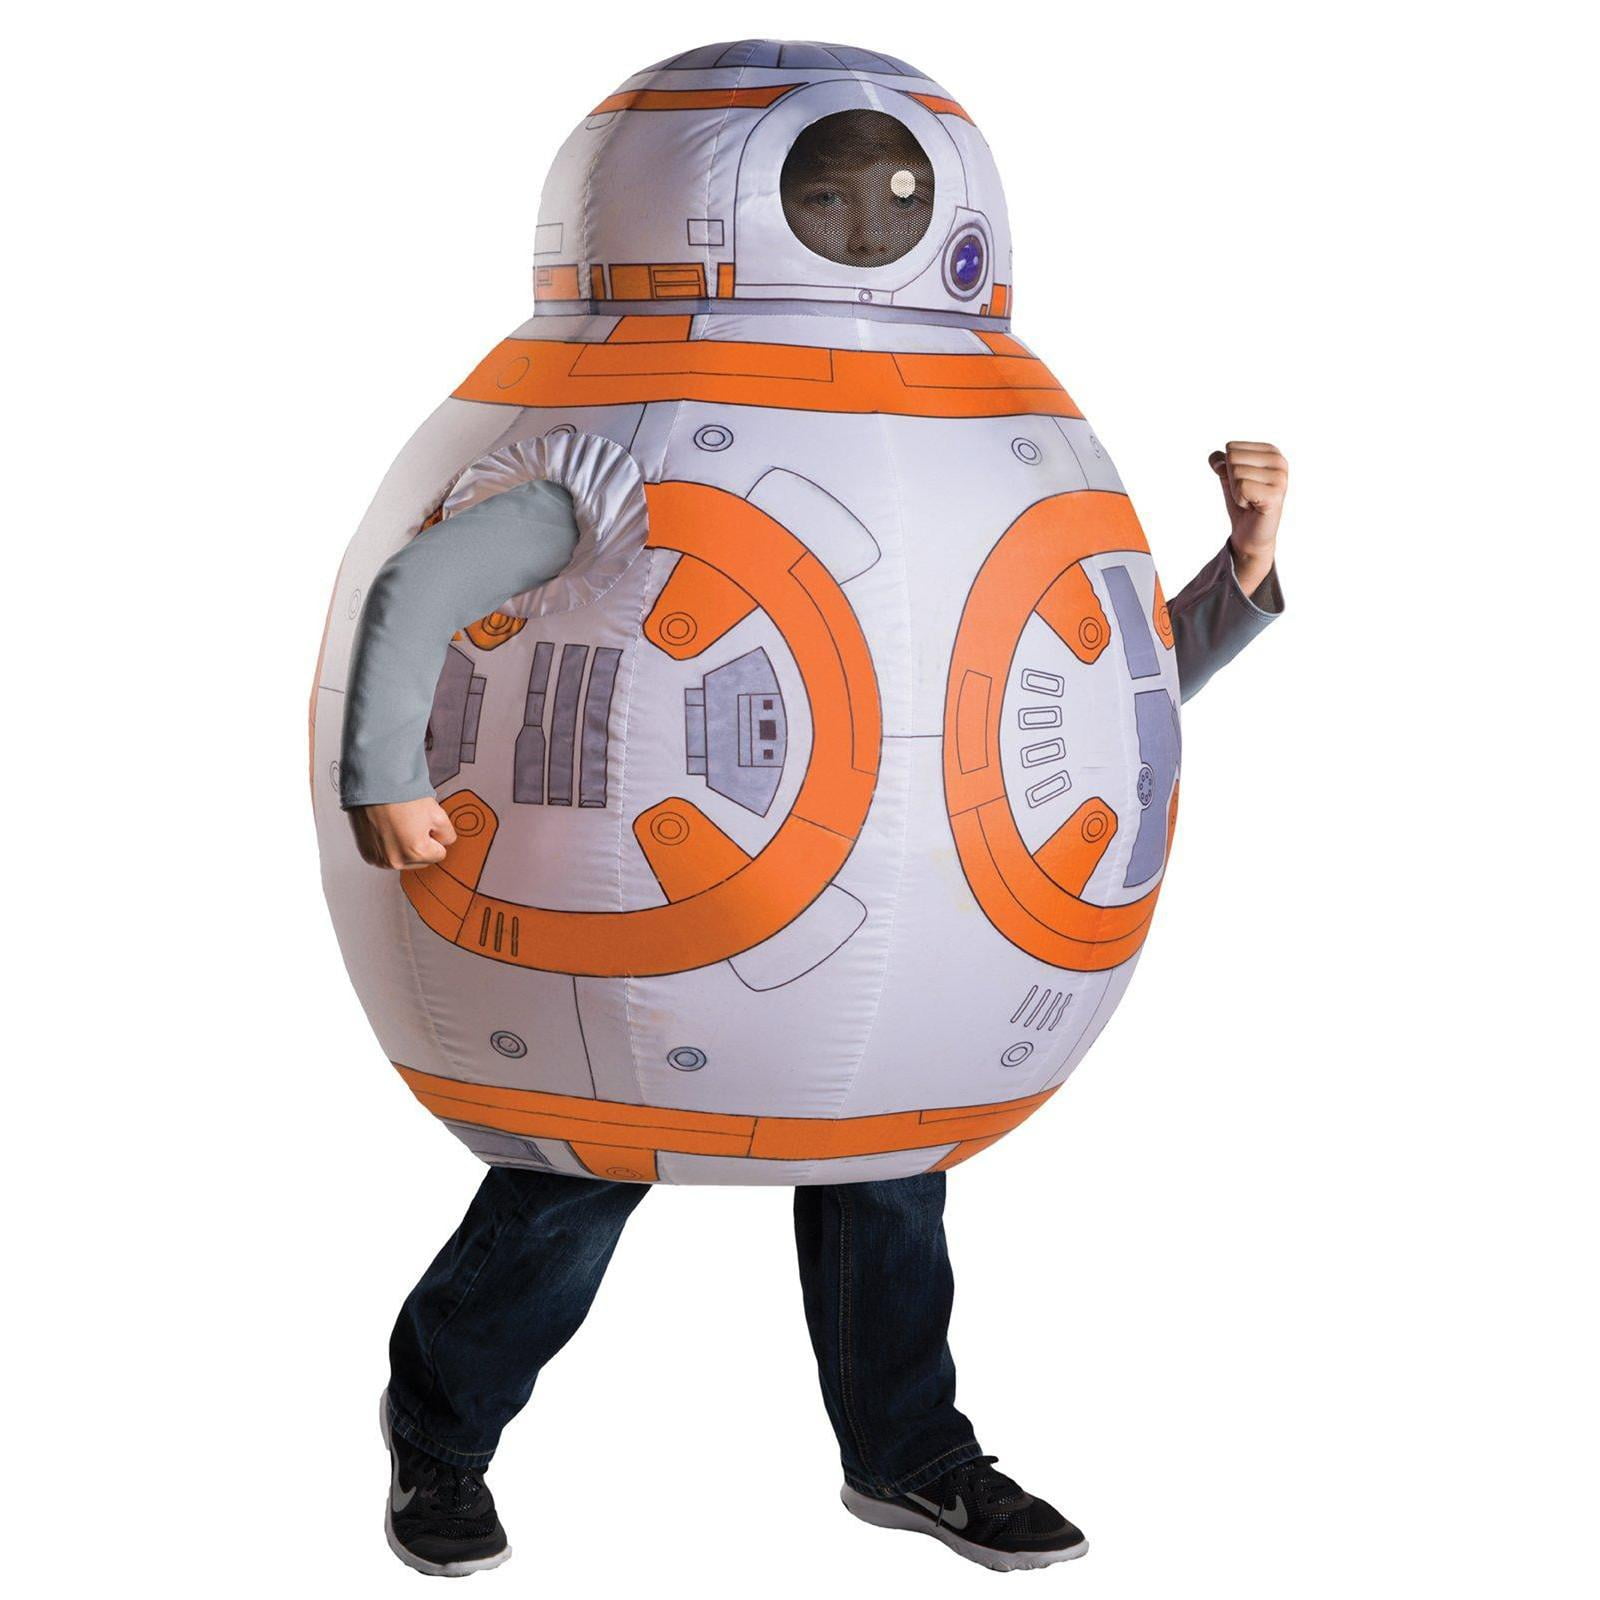 NEW One Size for 5-7 yrs old Details about   Star Wars BB-8 Inflatable Child Halloween Costume 